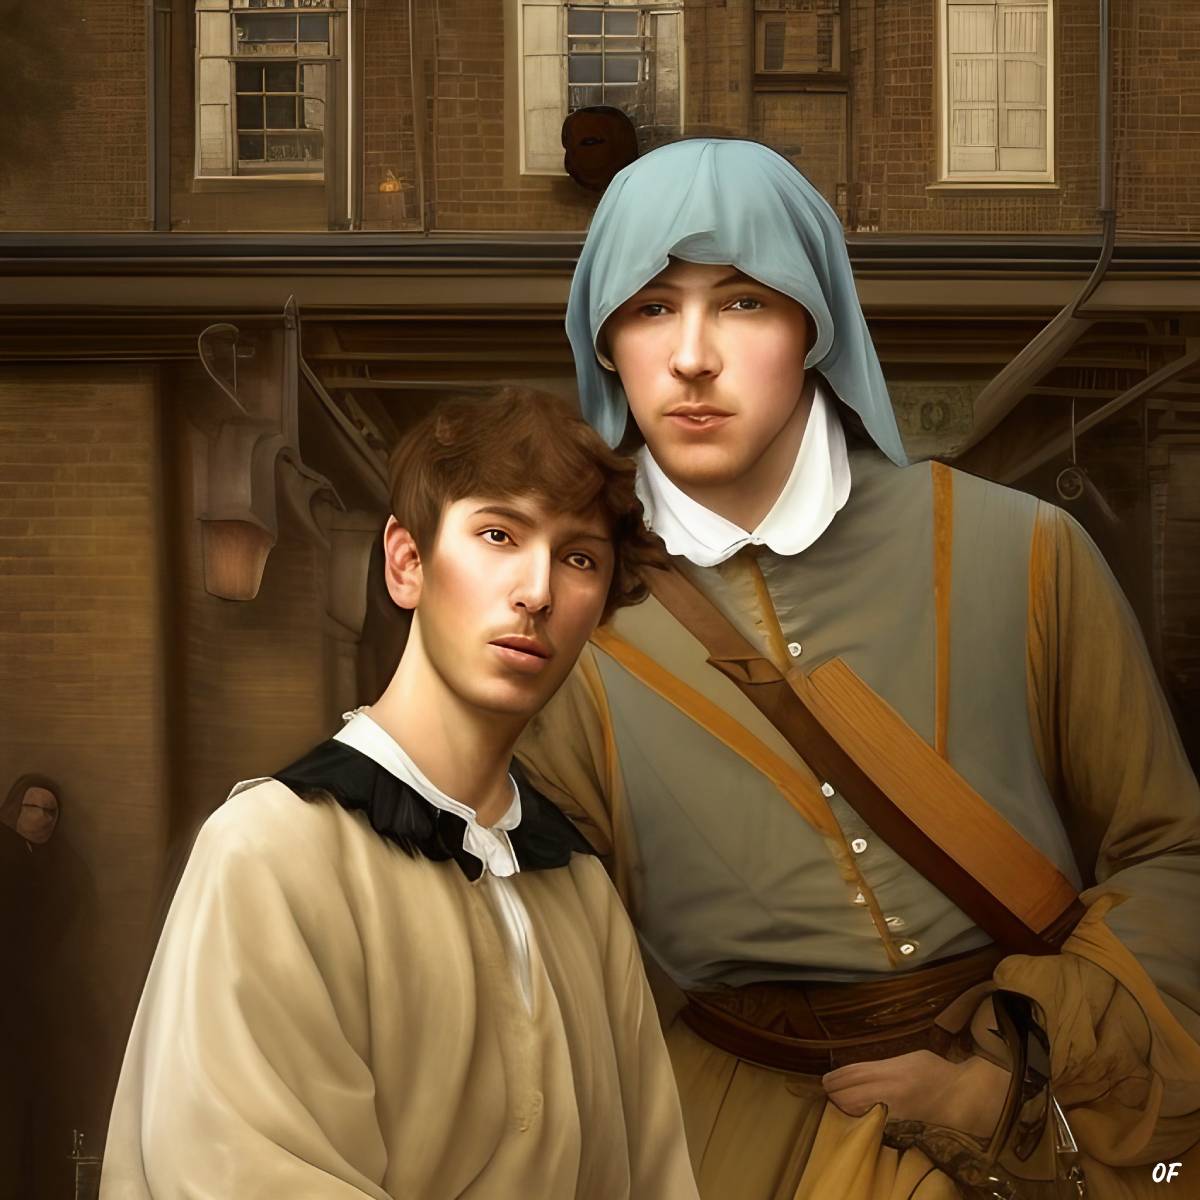 Portrait of medieval thieves in London.